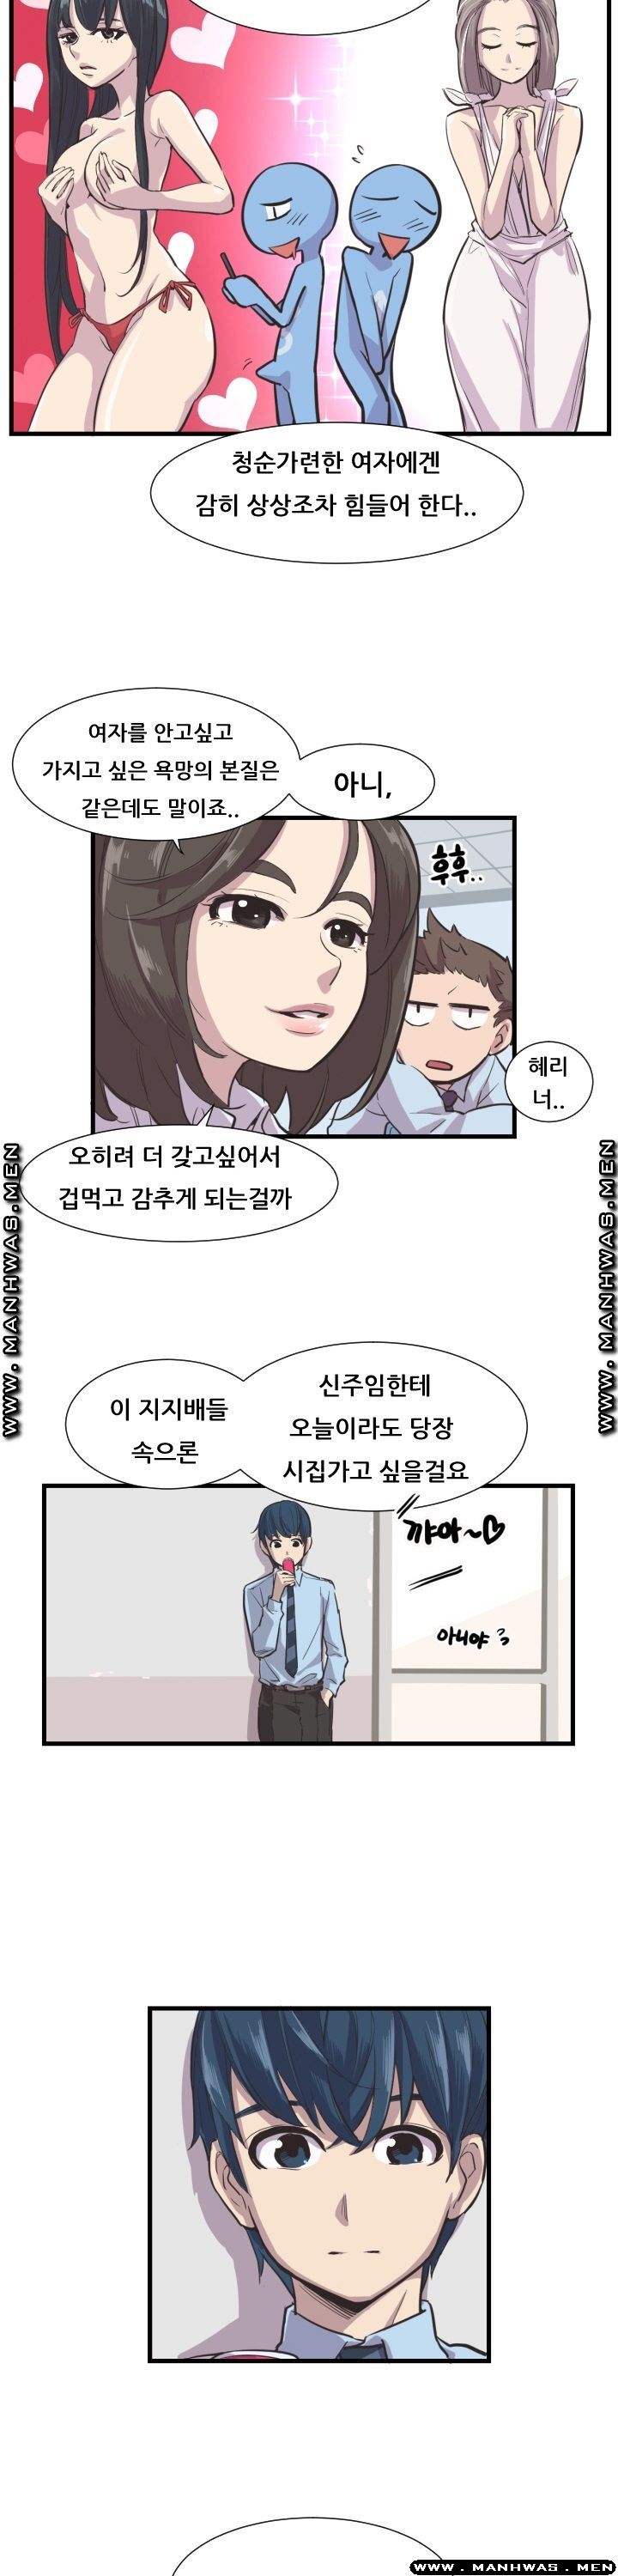 Innocent Man and Women Raw - Chapter 2 Page 10